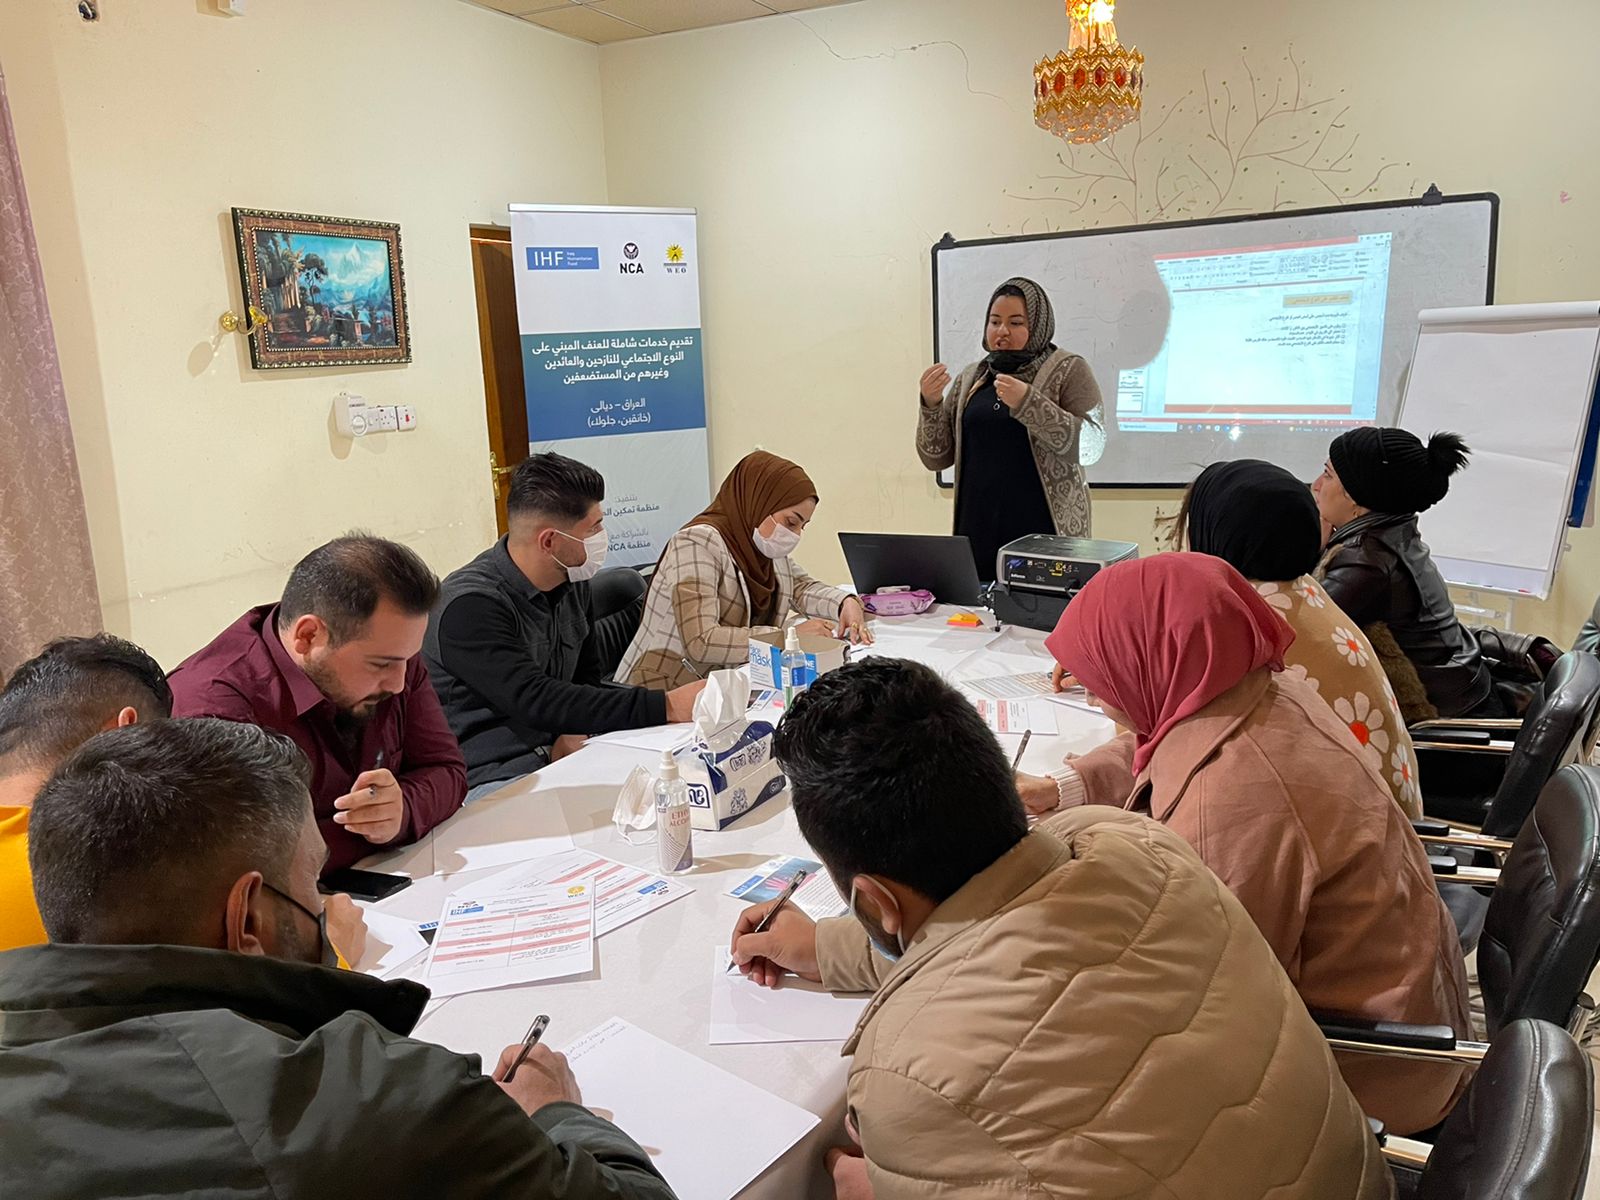 Khanaqin and Jalwala’a police and healthcare actors are involved in preventing and mitigating GBV and protection risks in Diyala governorate